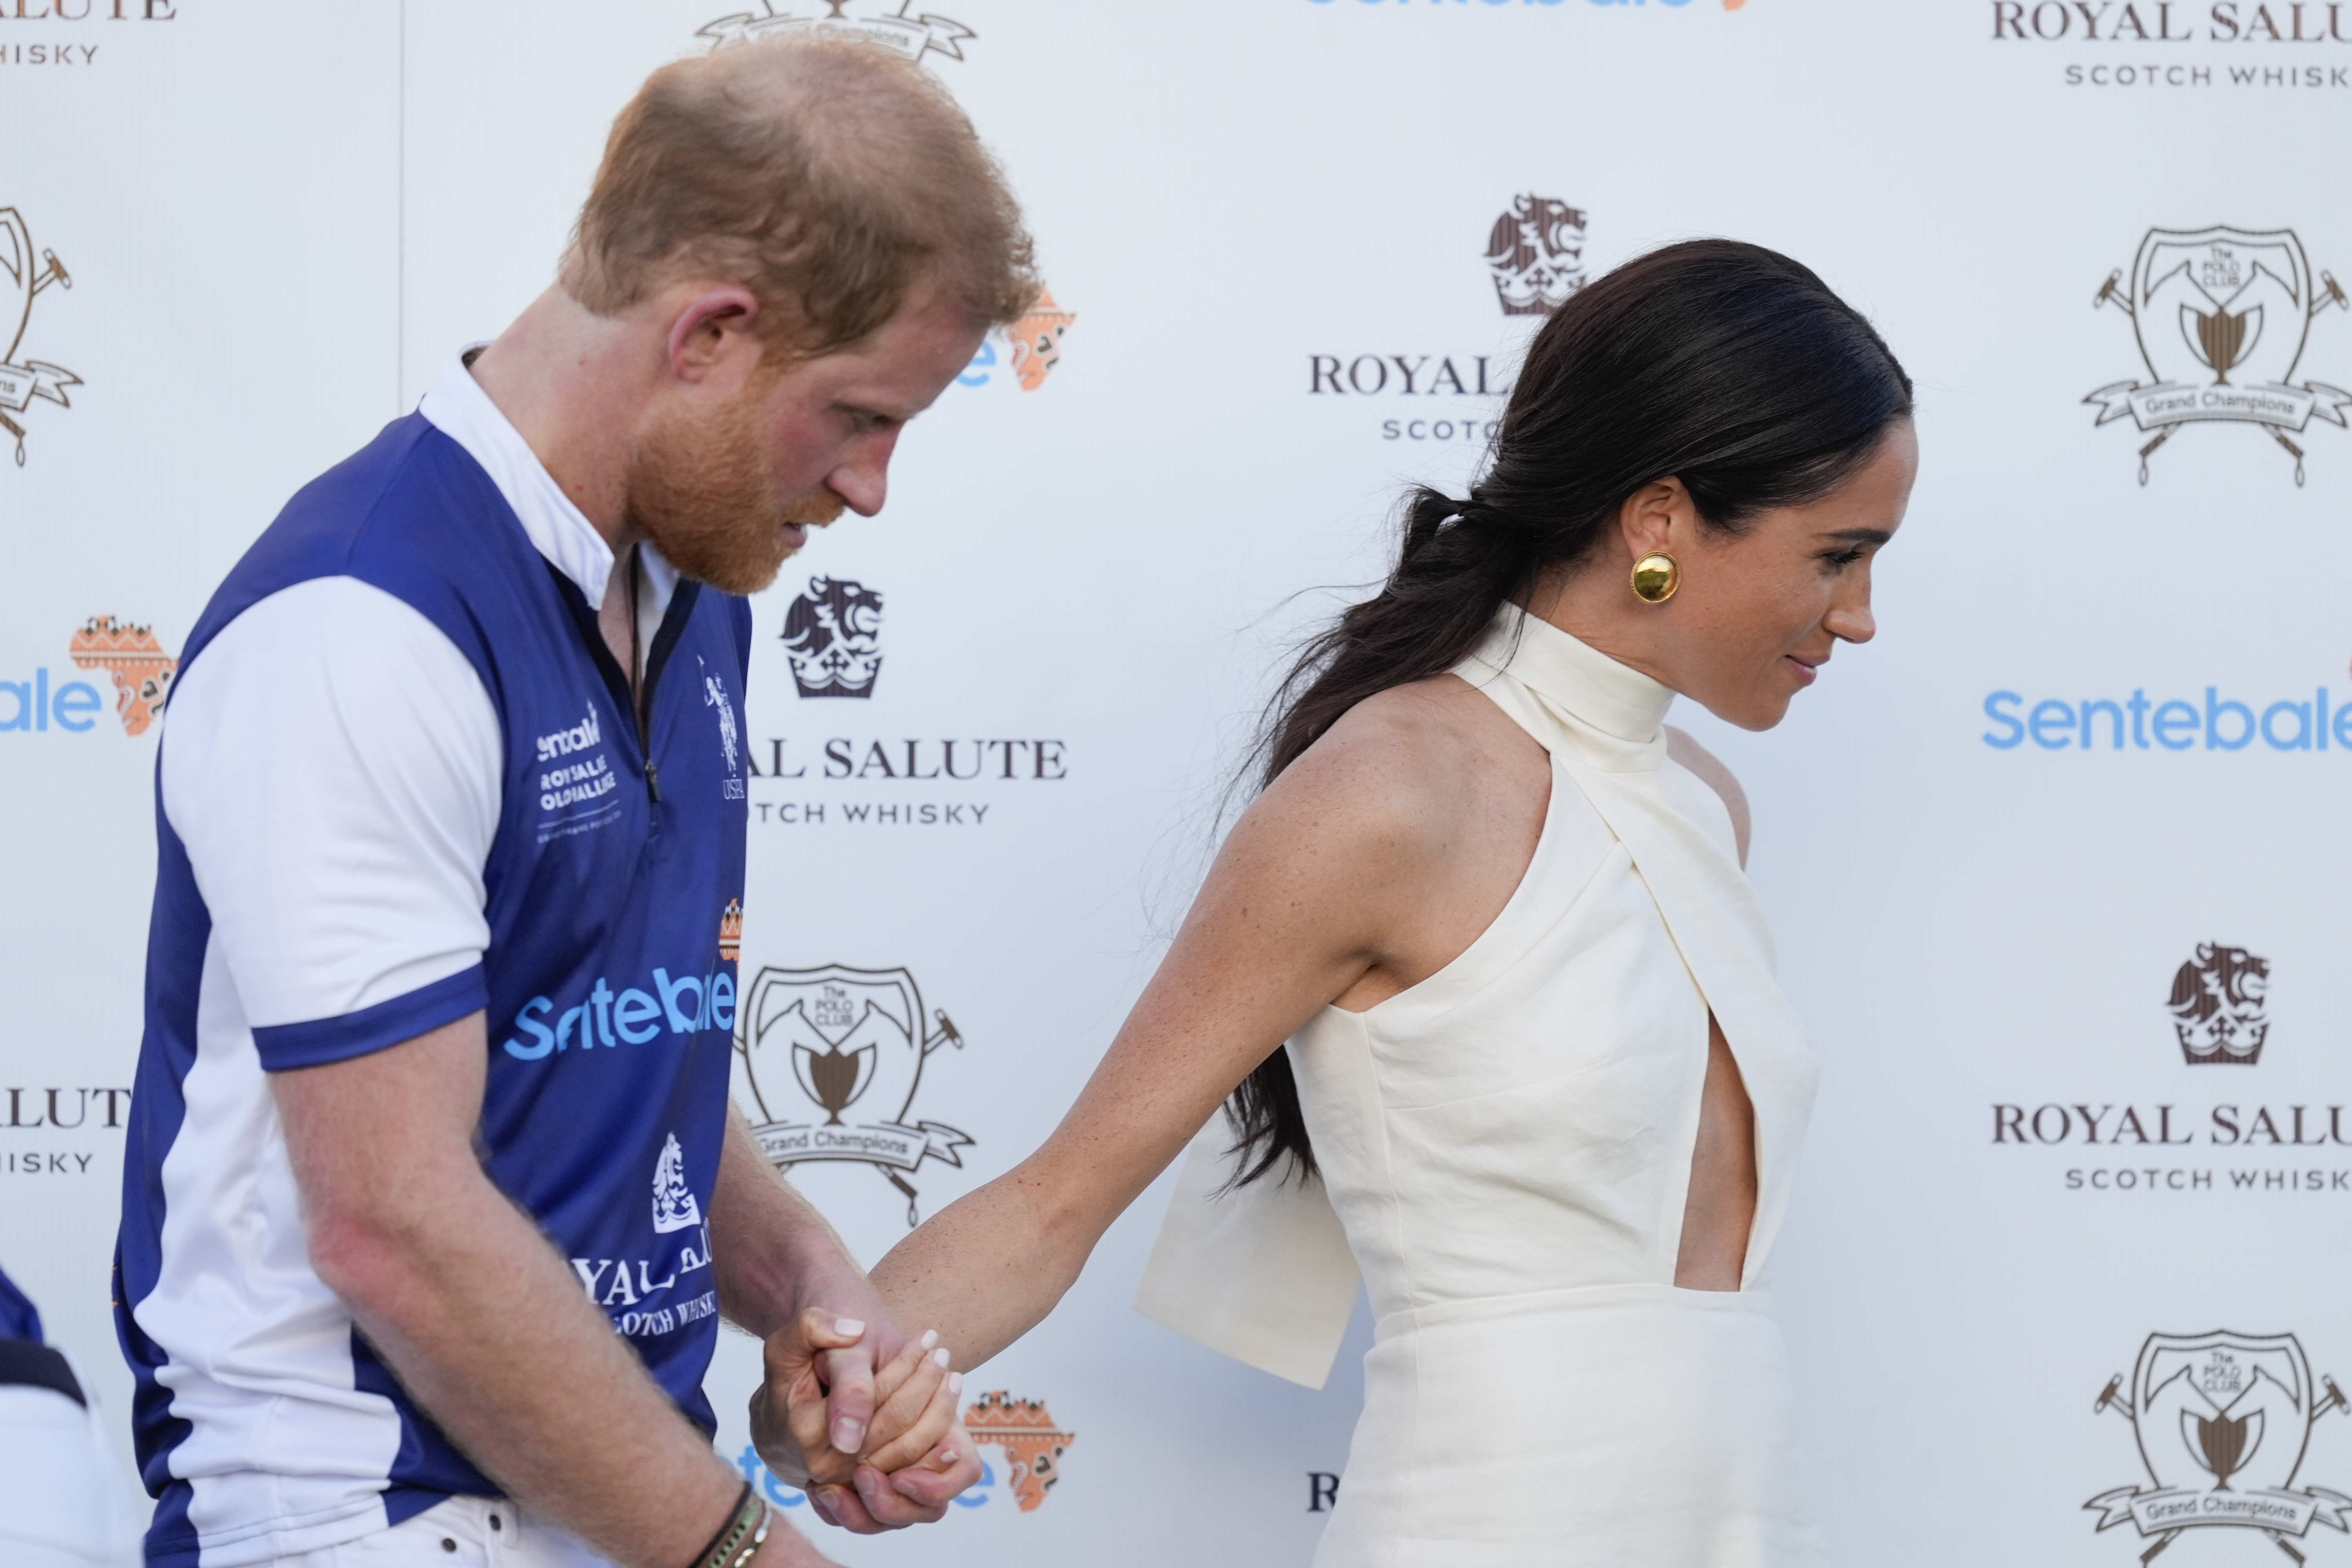 Prince Harry won’t meet with King Charles during Invictus visit in London